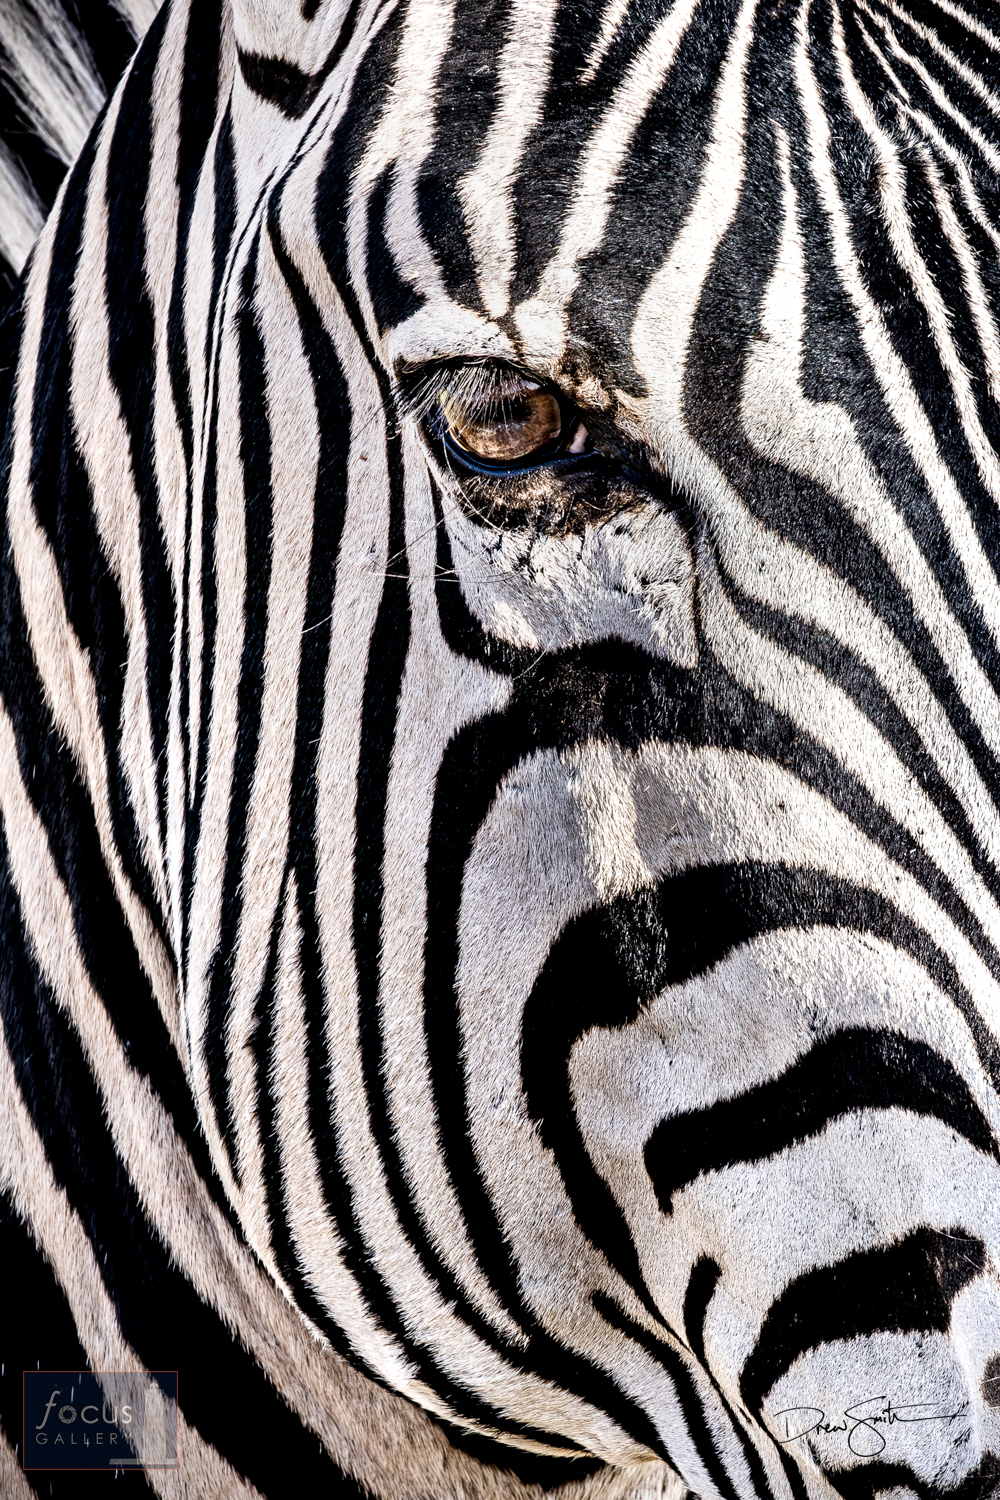 Few animals are as uniquely patterned and recognizable as a zebra!  Here I used a long lens to capture a close-up of a Burchell...